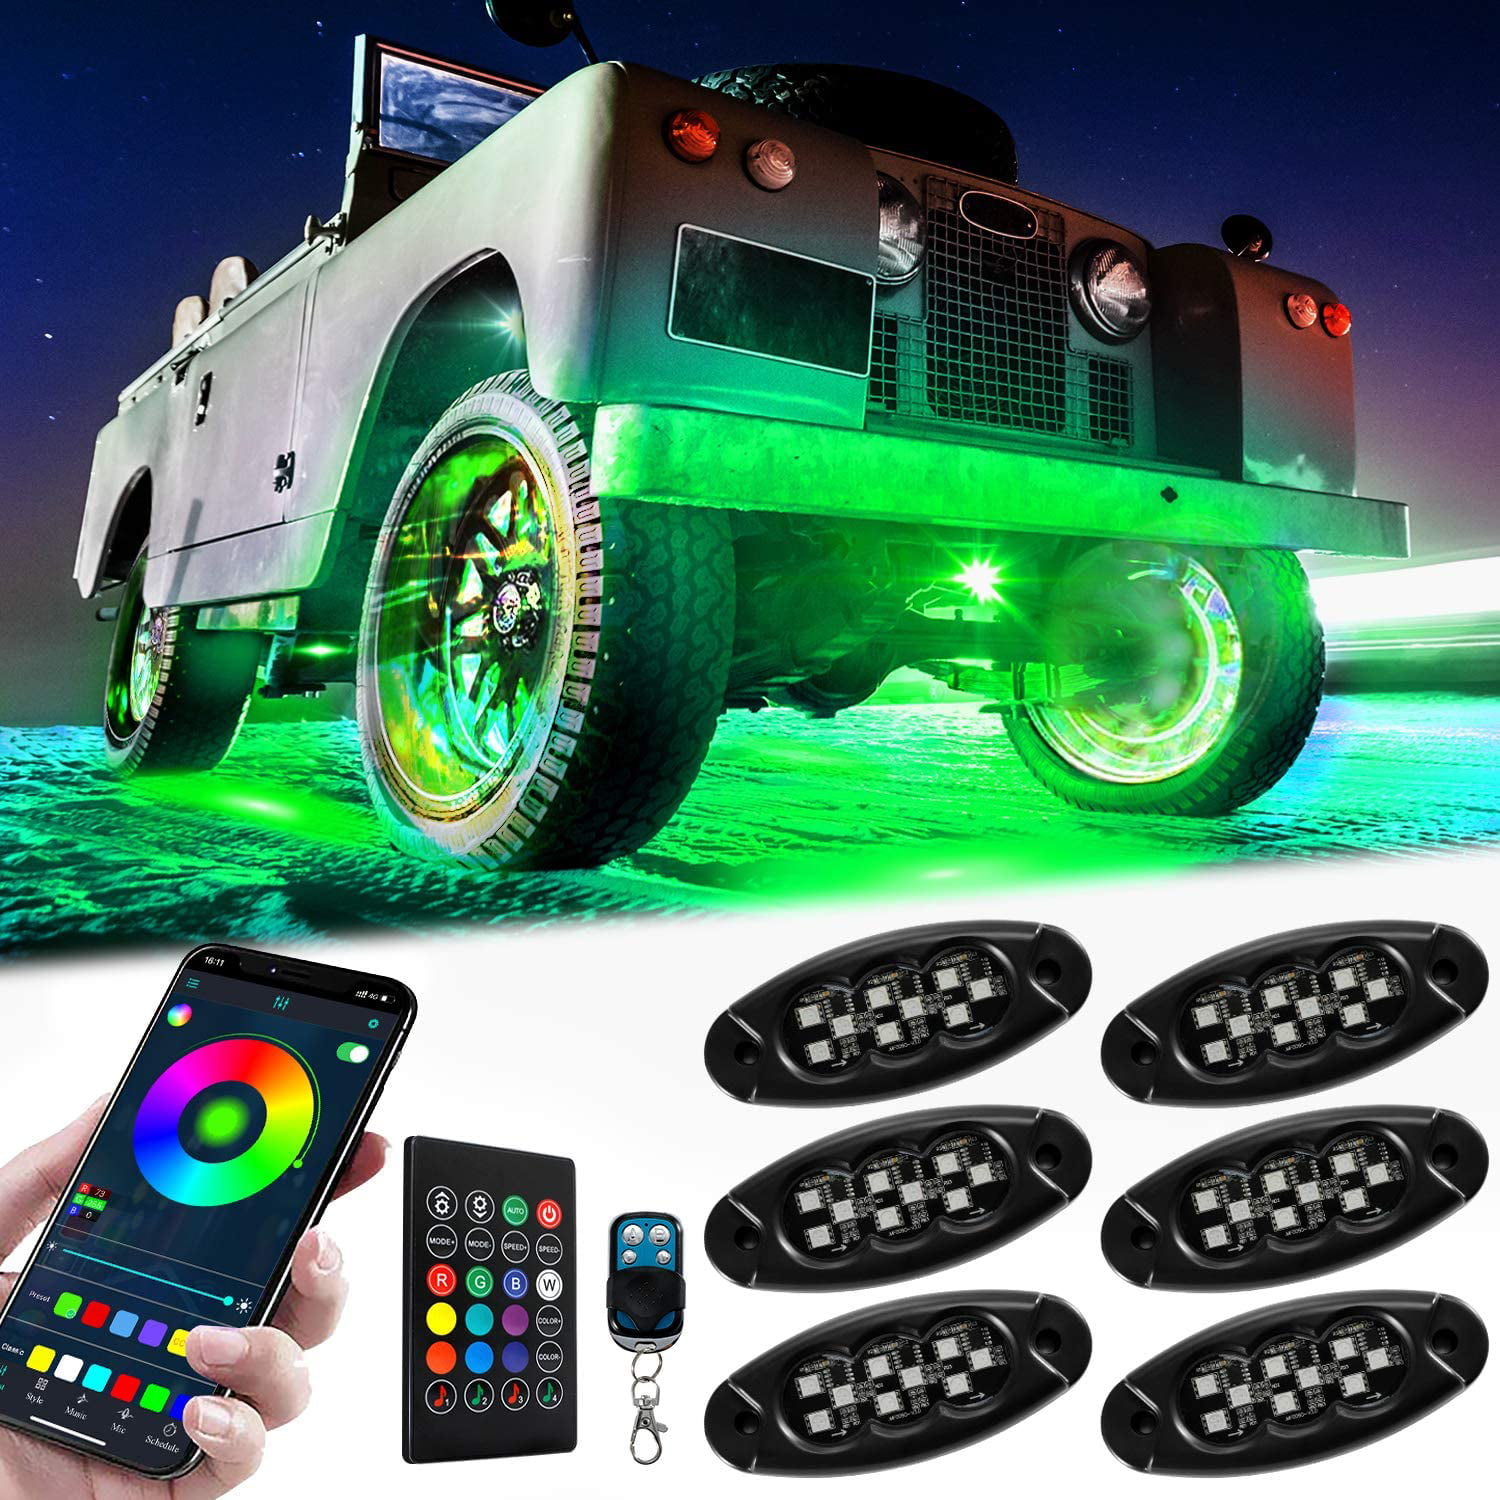 RGB LED Rock Lights 90 LEDs Underglow Neon Lights Kit Waterproof Interior Atmosphere Lights for Truck Jeep Off Road Car APP Control Music Mode Timing Function 